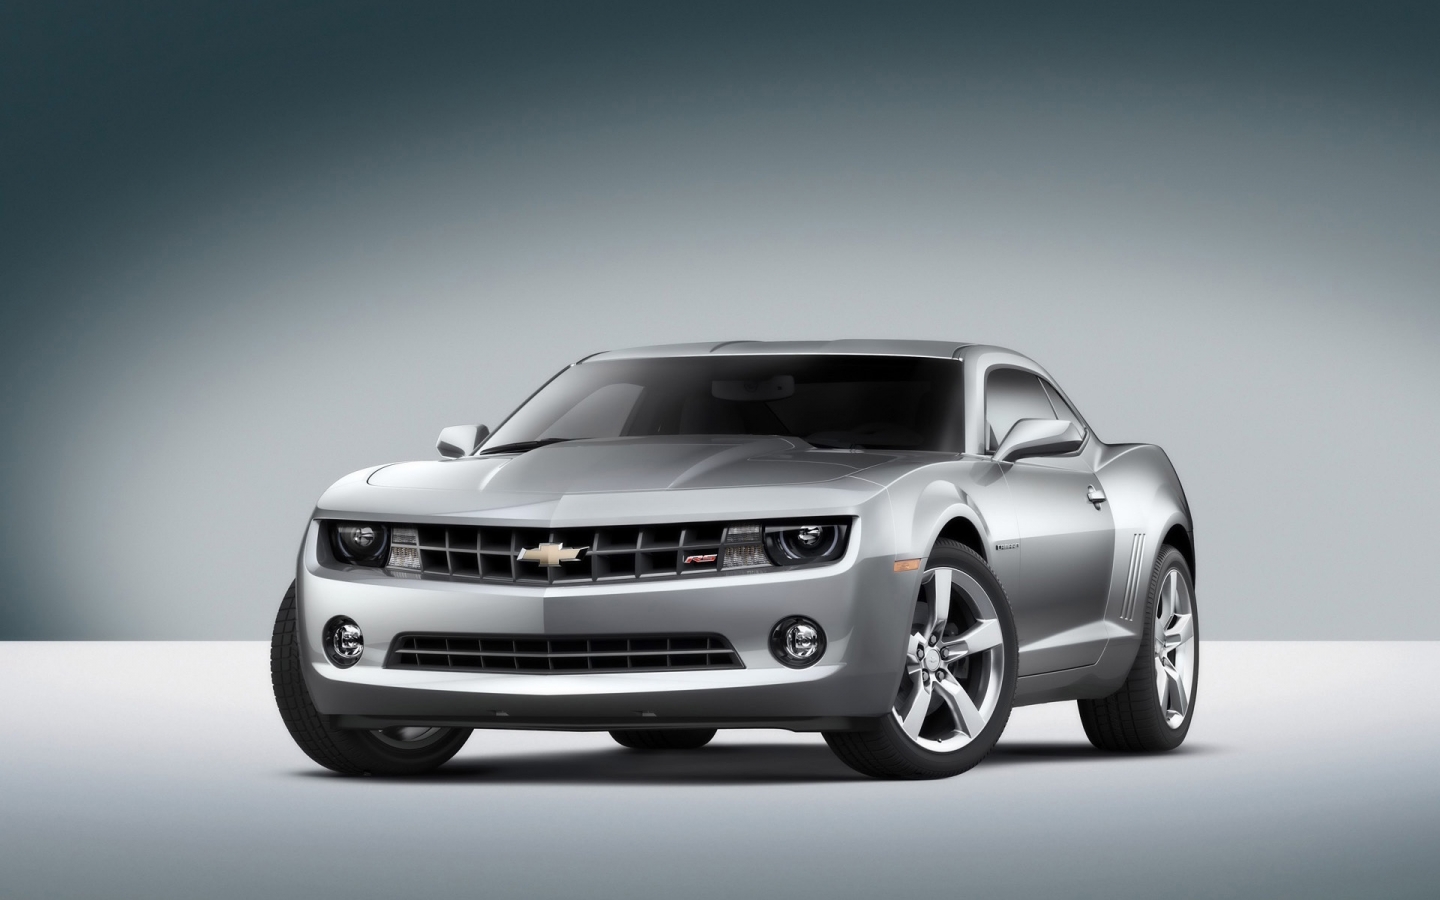 Chevrolet Camaro RS 2010 Grey Front Angle for 1440 x 900 widescreen resolution